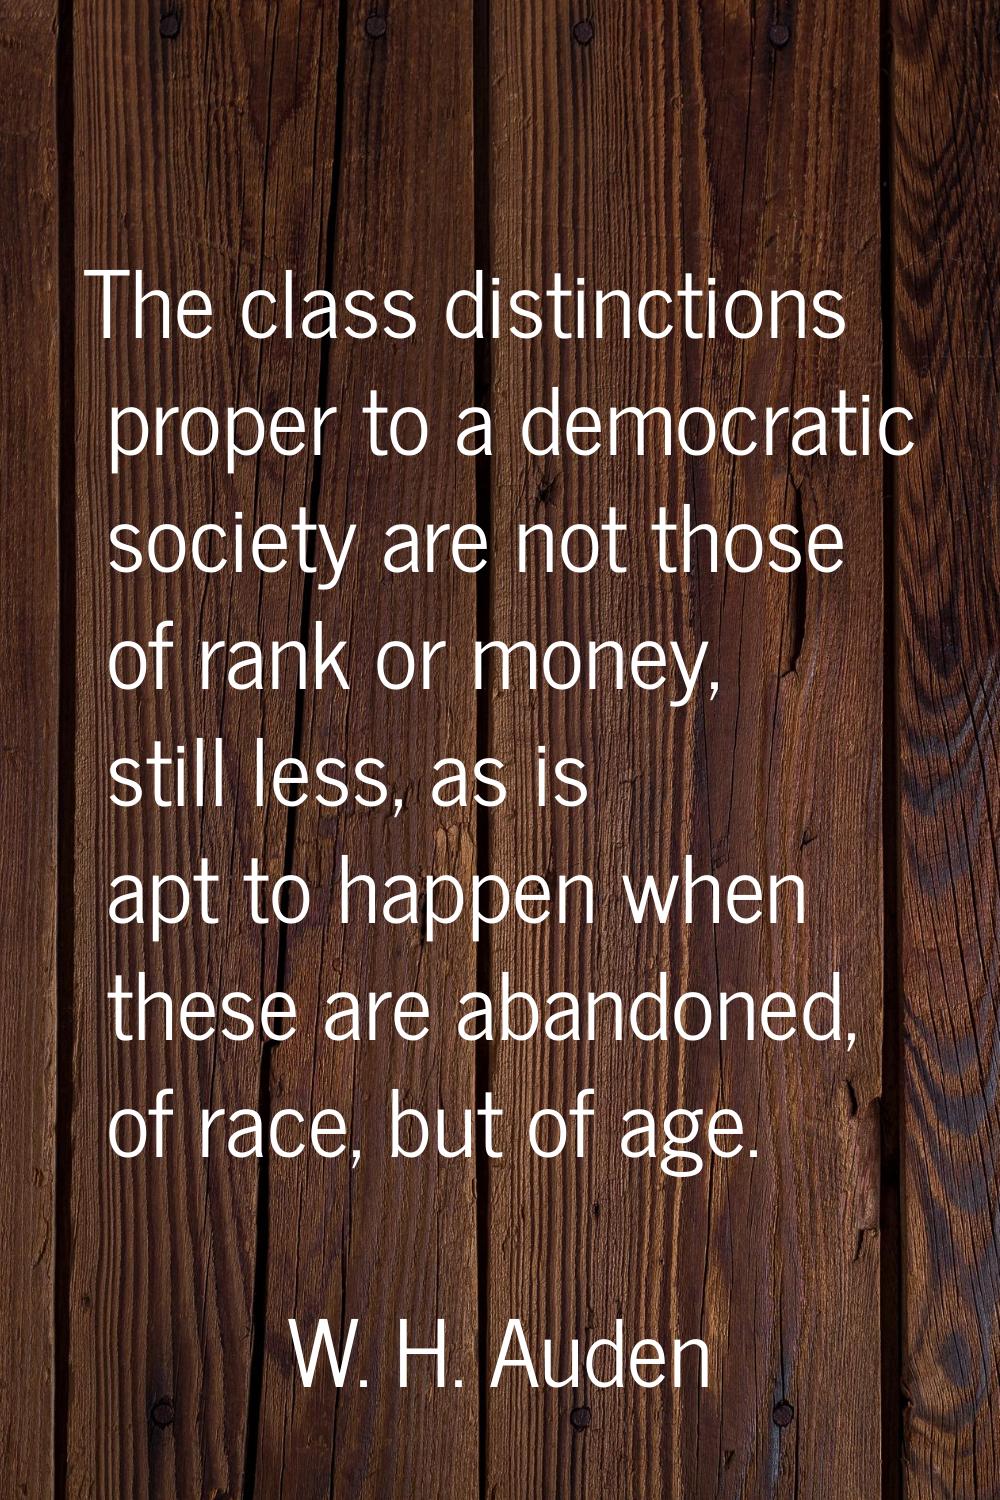 The class distinctions proper to a democratic society are not those of rank or money, still less, a